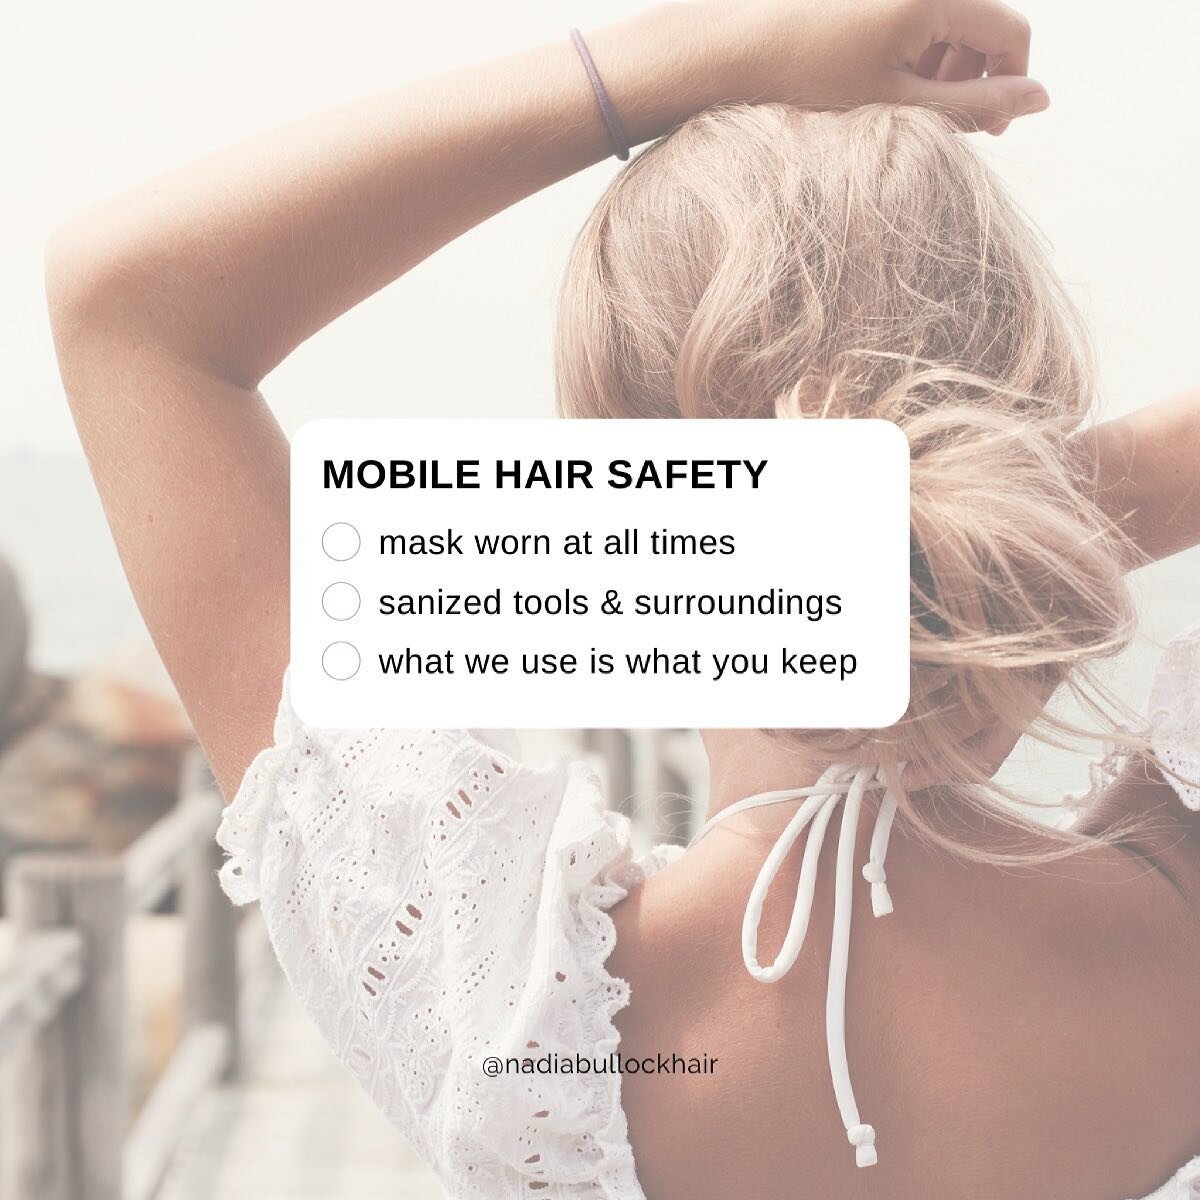 Don&rsquo;t feel comfortable going to a salon these days? 💇🏼&zwj;♀️ Not too worry! We can come to you with all safety precautions in mind!! 

Safety is as important as beautiful &amp; amazing hair🙌 

Our protocols are: 
1) Masks 😷 to be worn at a